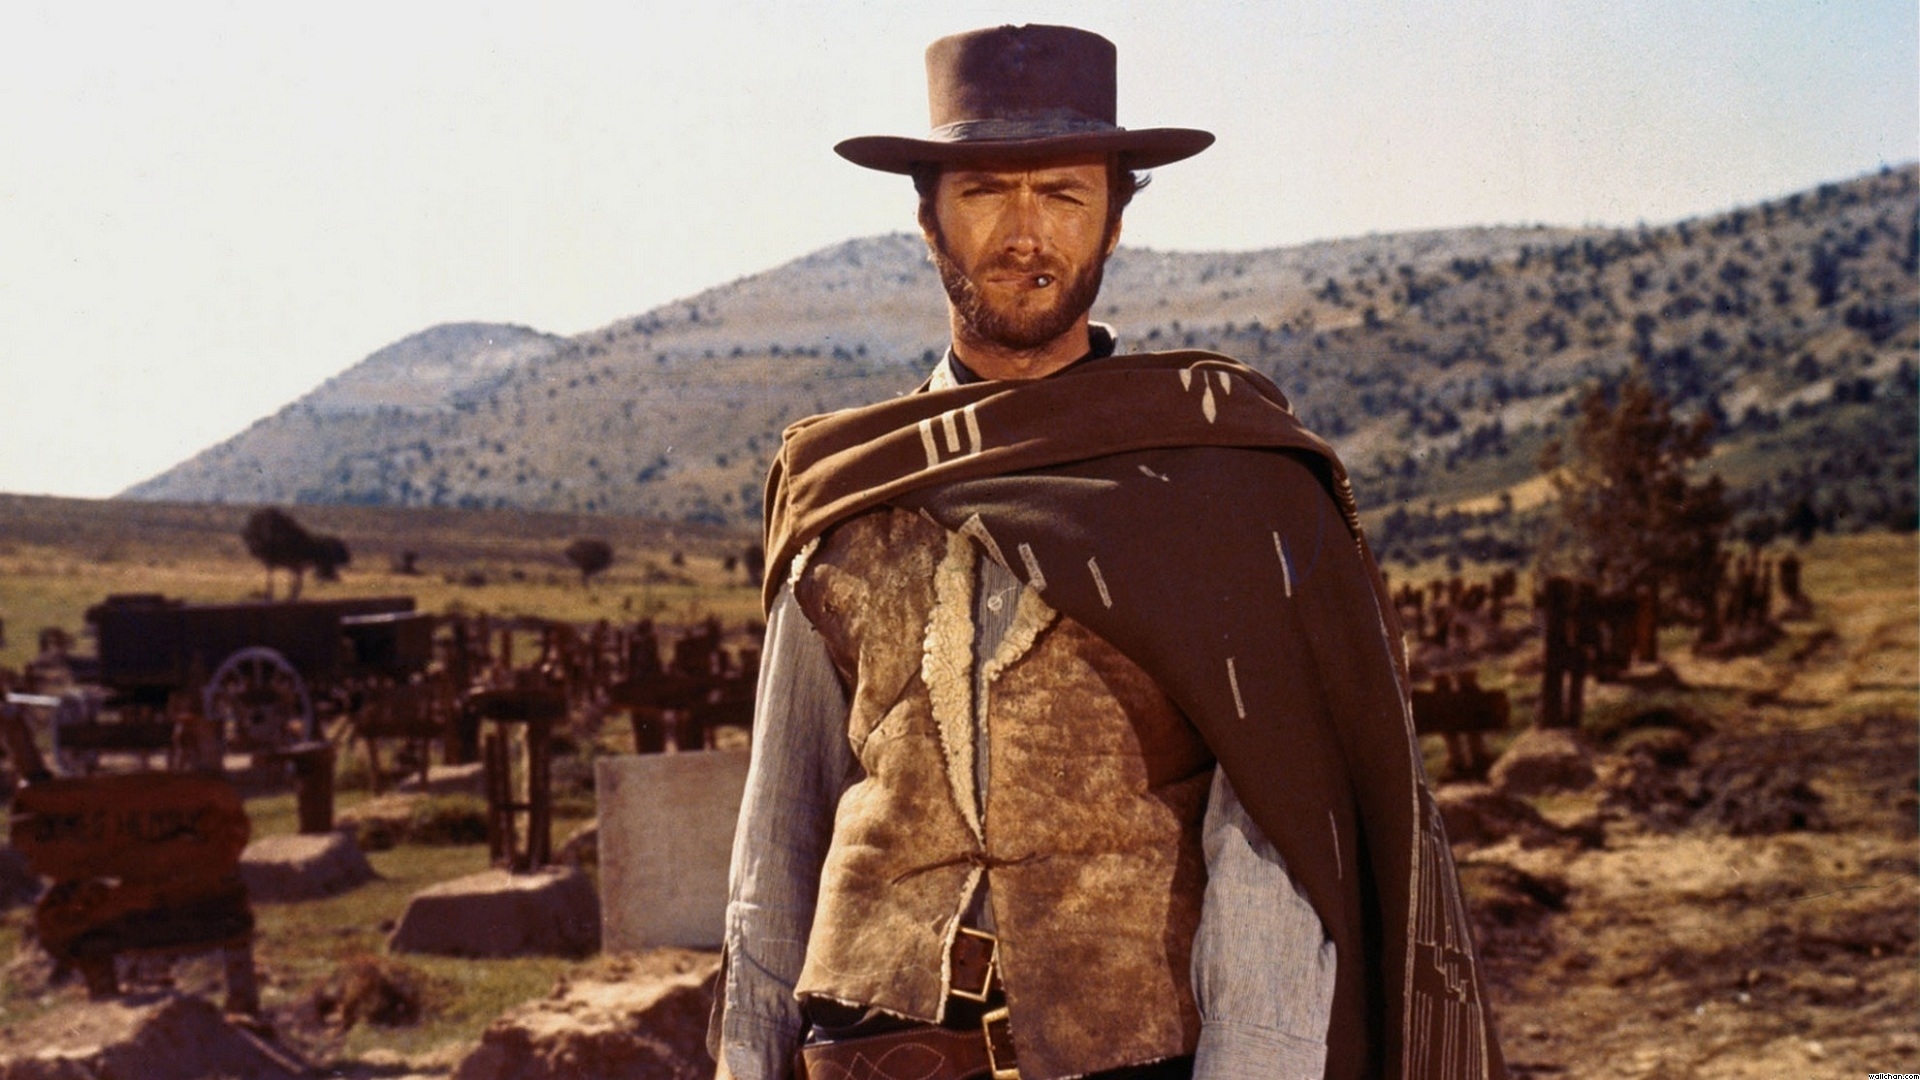 the, Good, The, Bad, And, The, Ugly, Clint, Eastwood, Rustic, Cowboy, Western, Actor Wallpaper